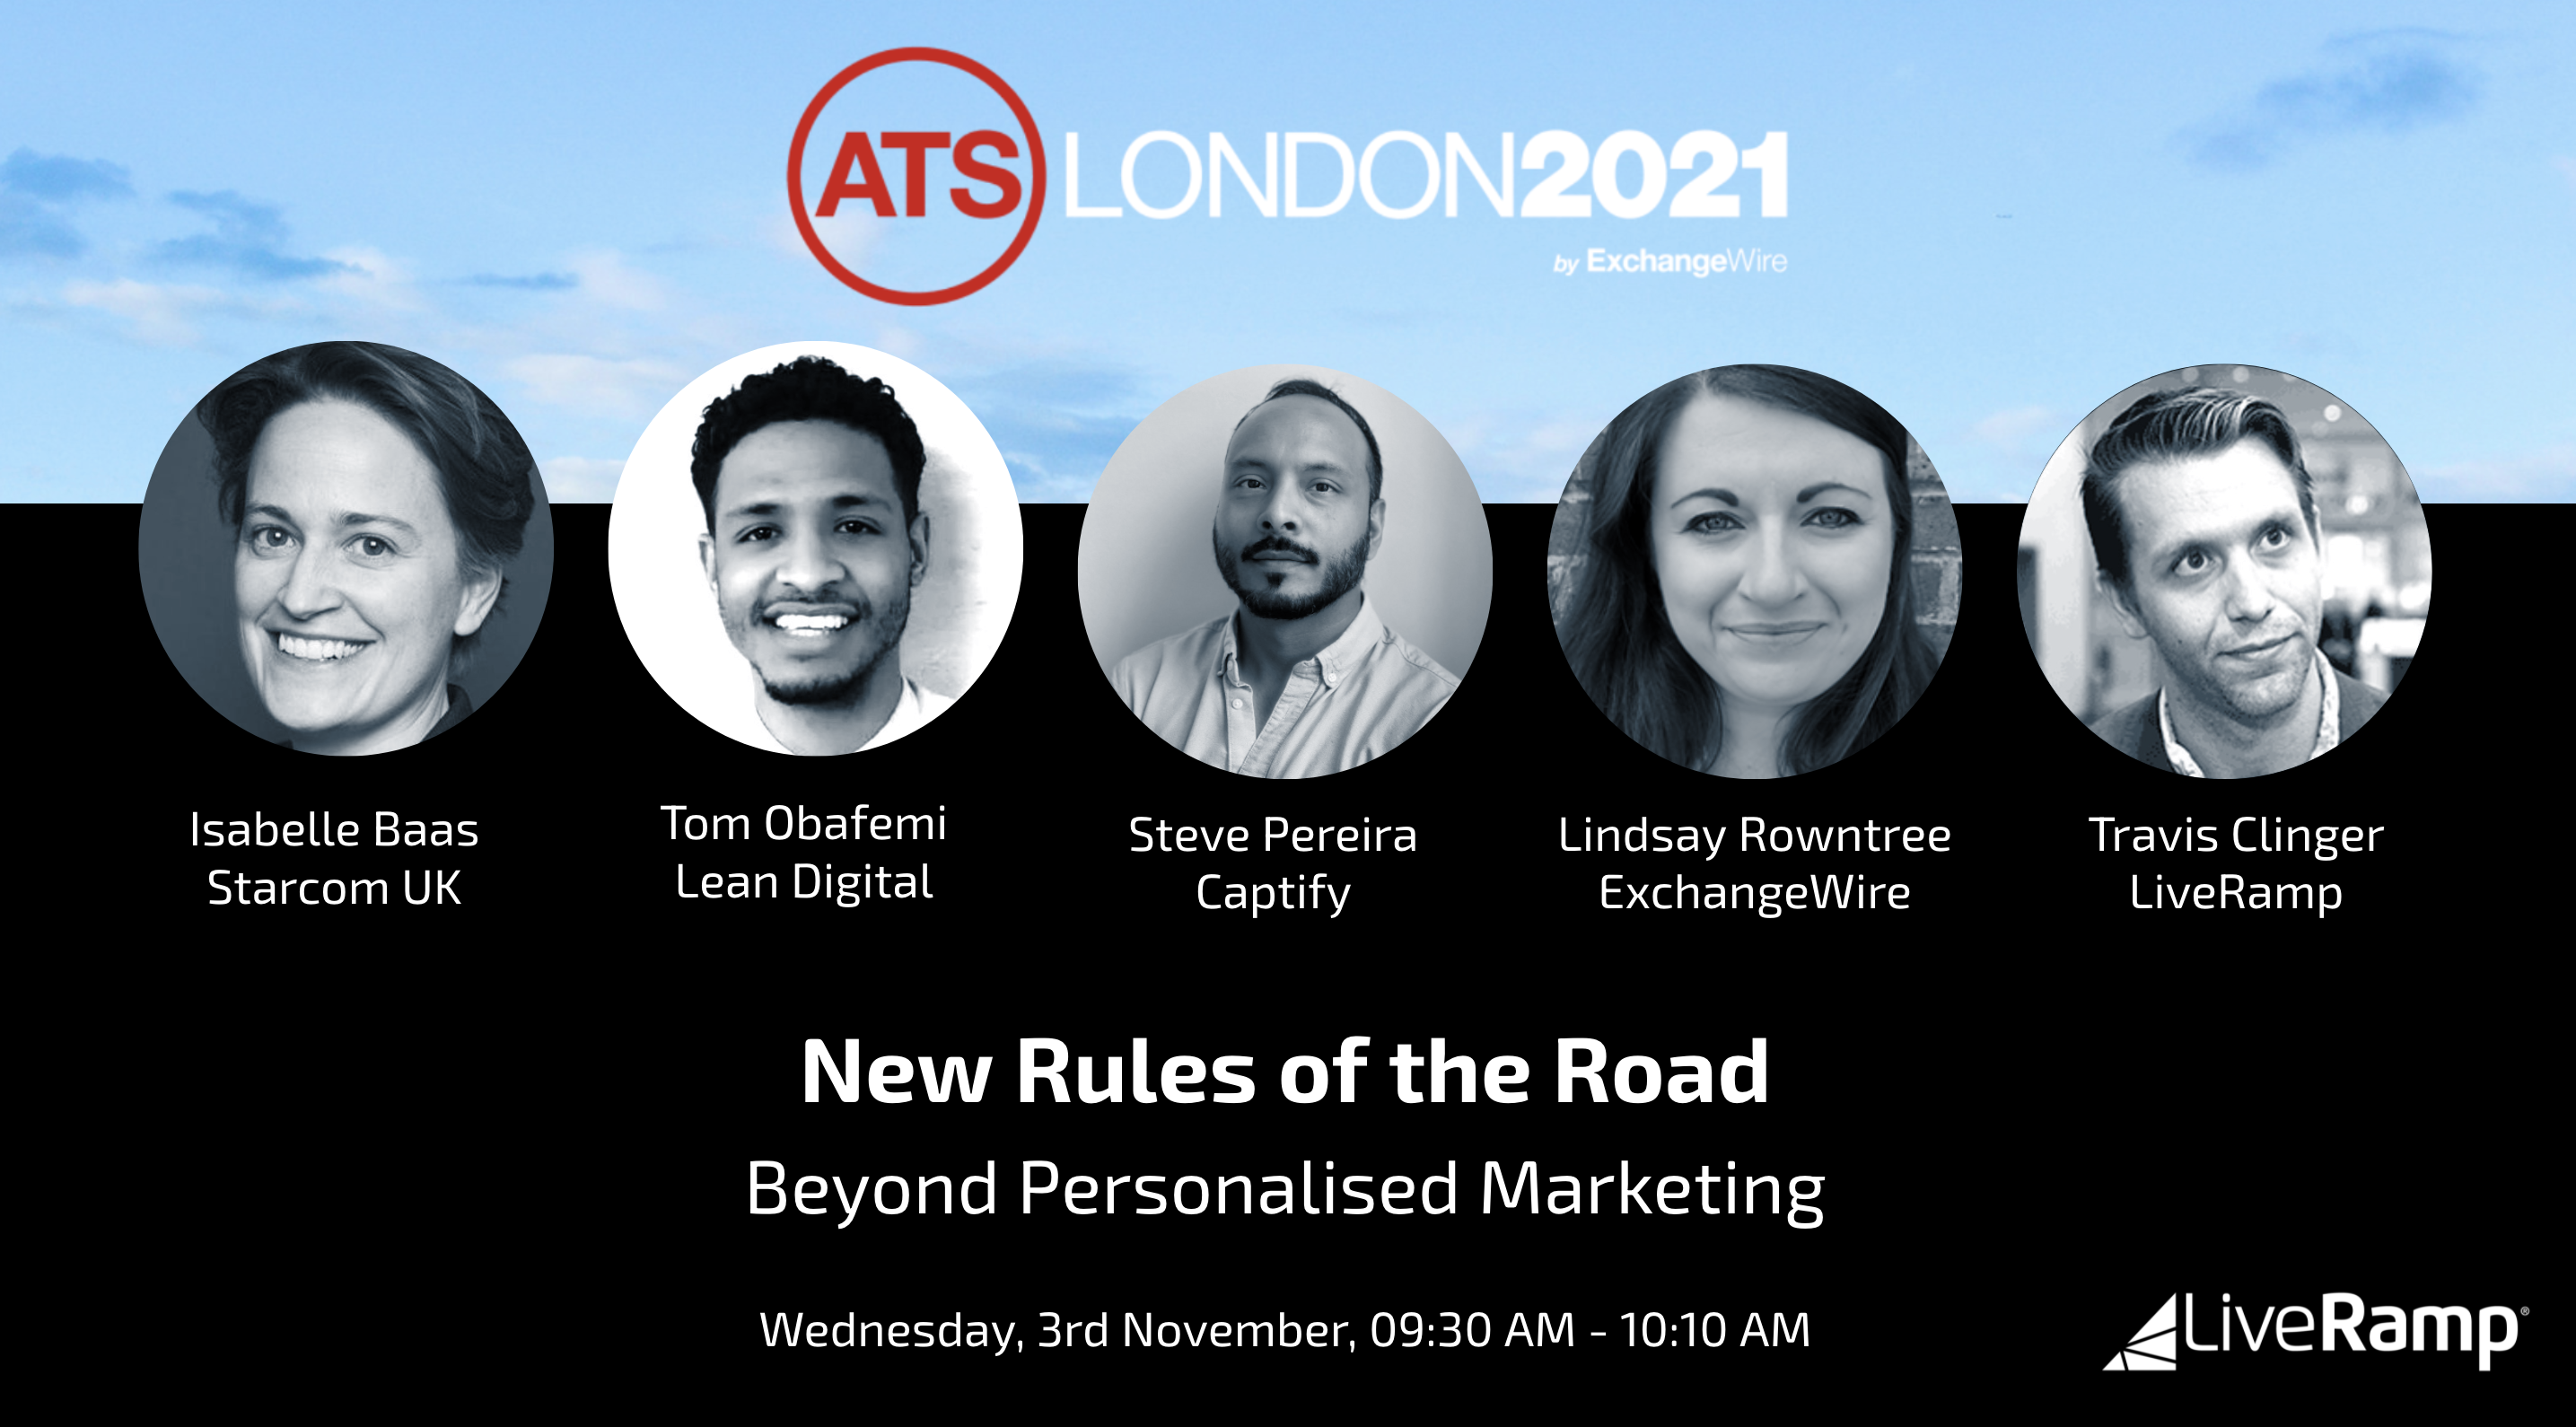 Photos of the panelists from our “New Rules of the Road” panel. From left to right: Isabelle Baas, Starcom UK; Tom Obafemi, Lean Digital; Steve Pereira, Captify; Lindsay Rowntree, ExchangeWire; Travis Clinger, LiveRamp.